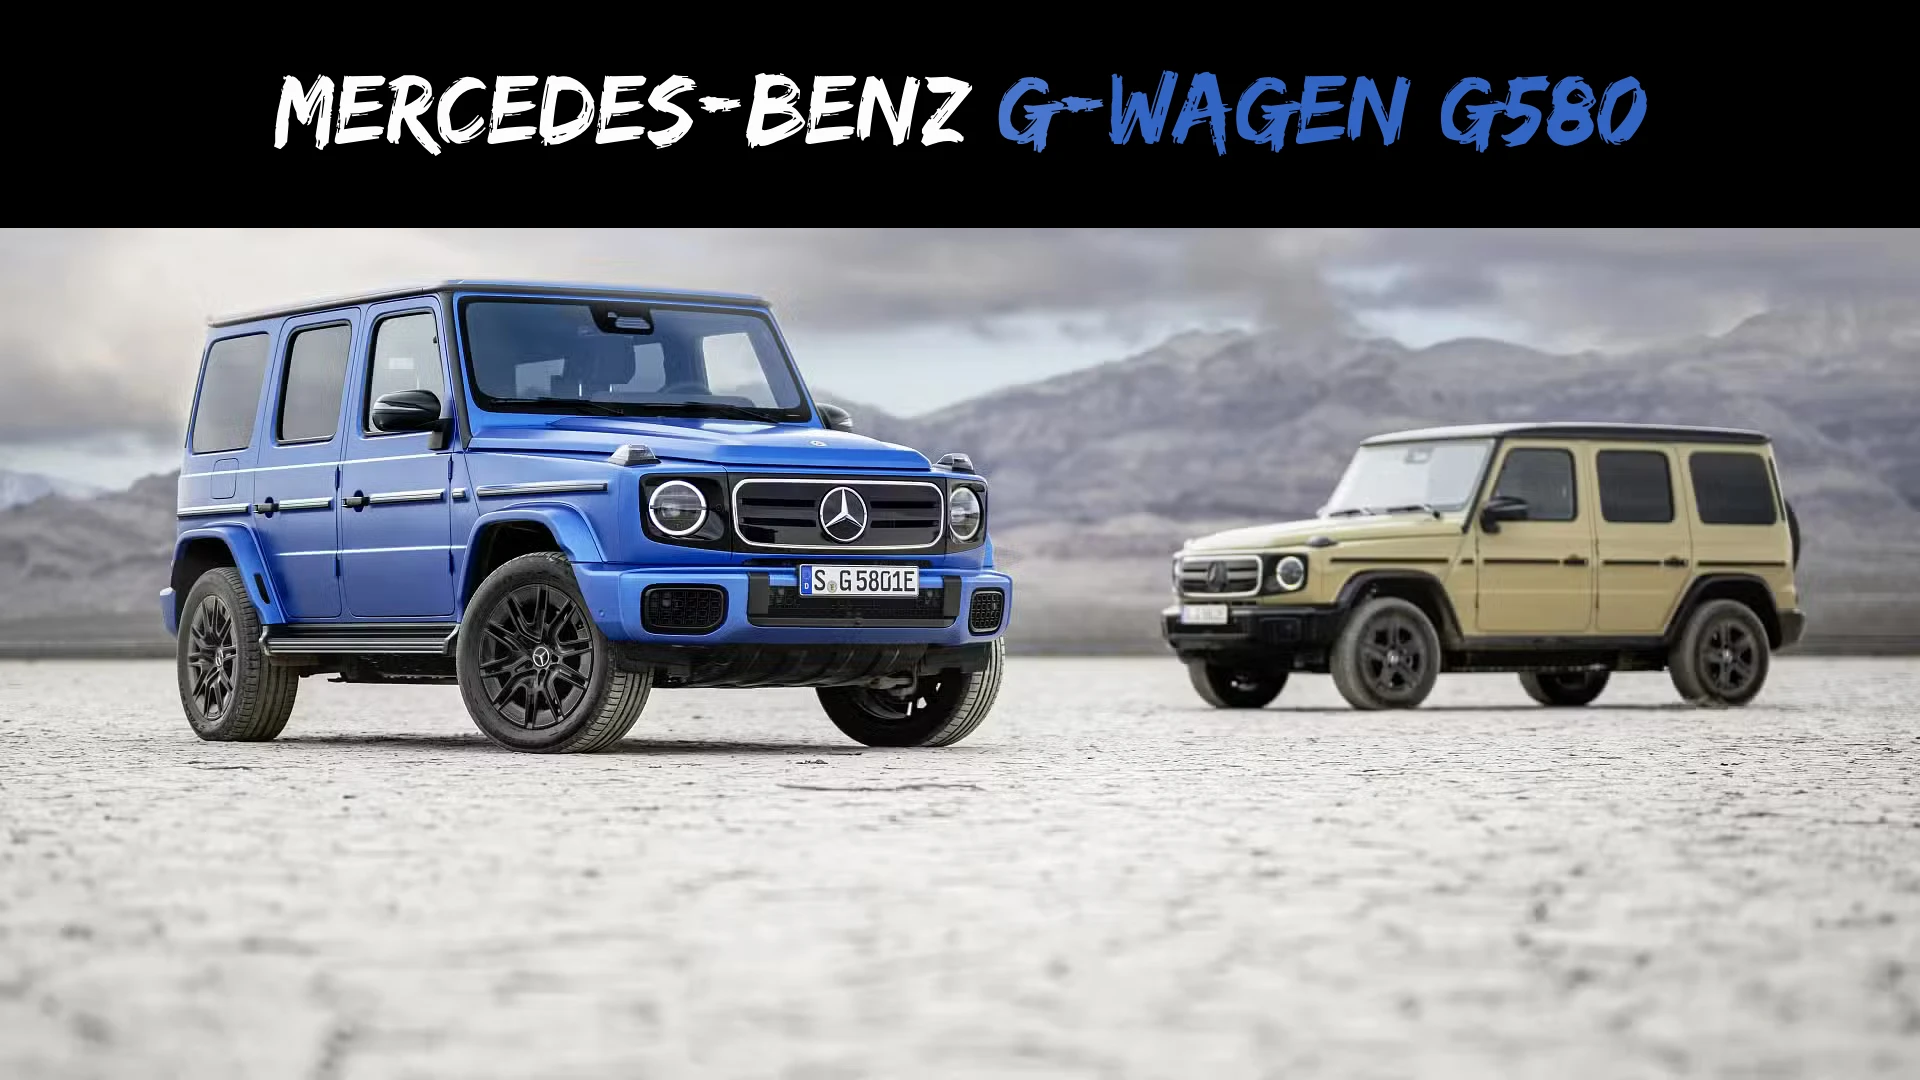 Icon Goes Electric: Mercedes-Benz G-Wagen G580 Edition One Unveiled